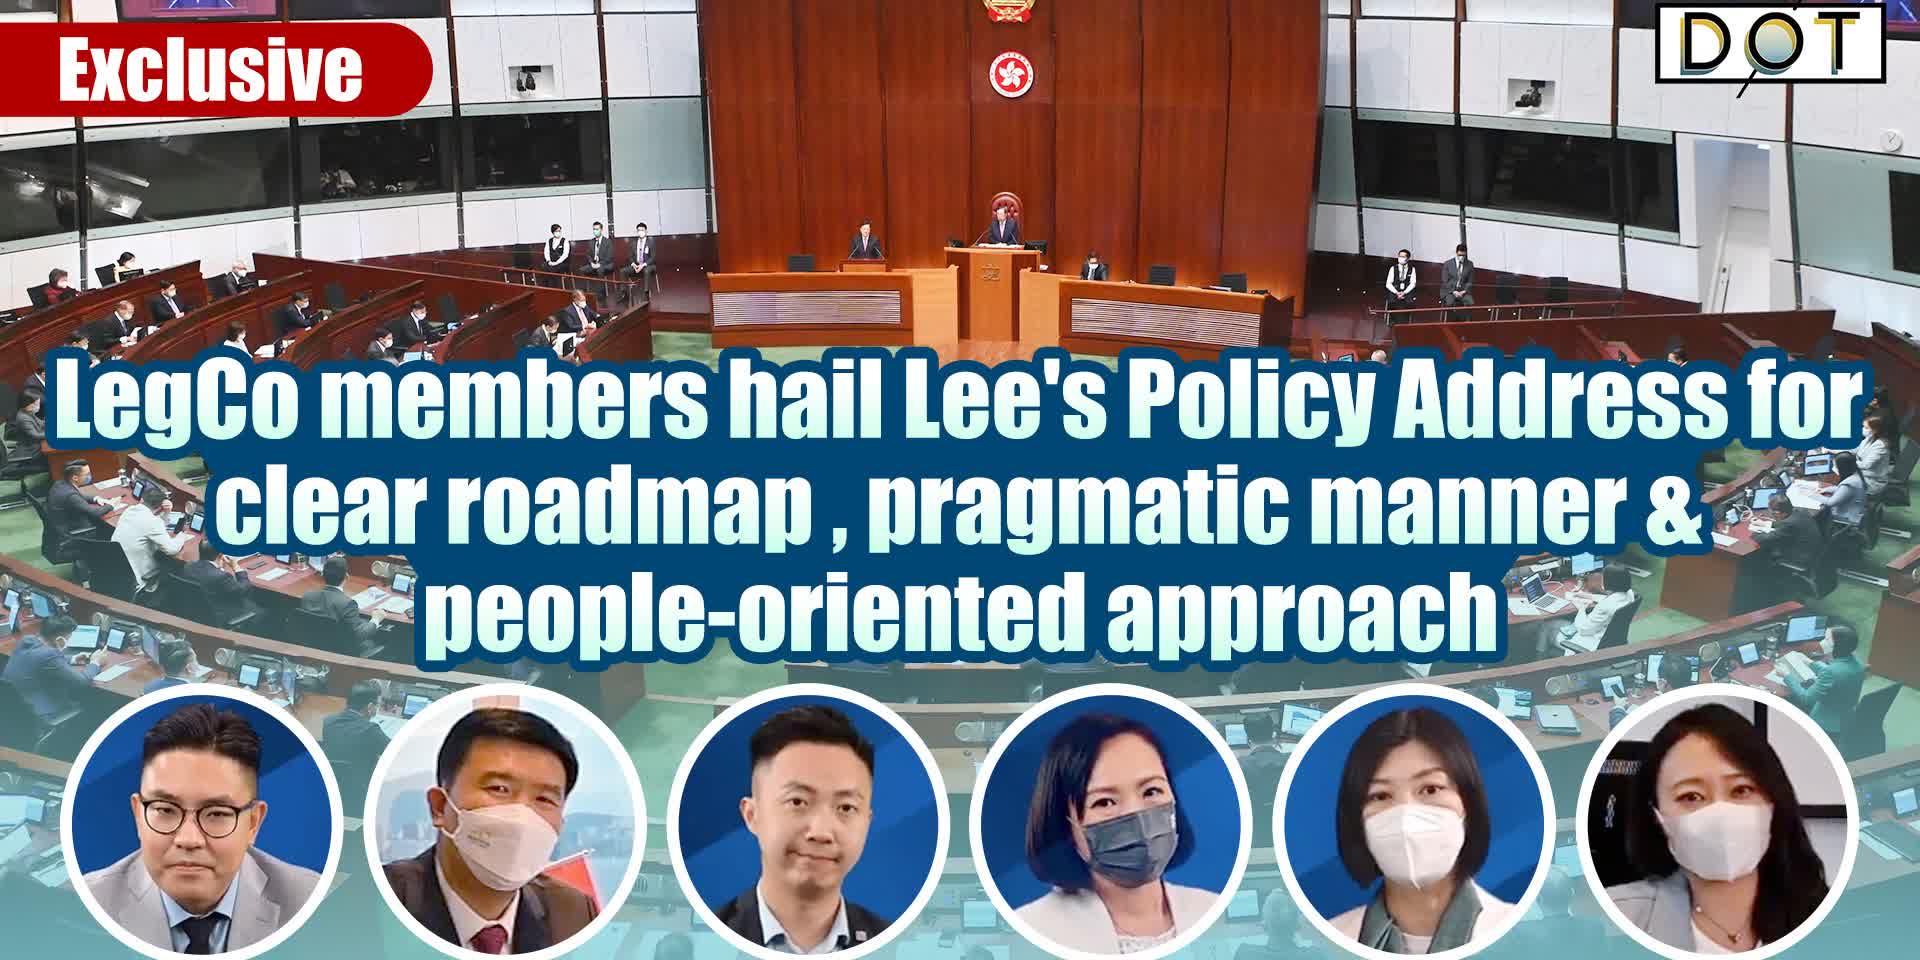 Exclusive | LegCo members hail Lee's Policy Address for clear roadmap, pragmatic manner & people-oriented approach